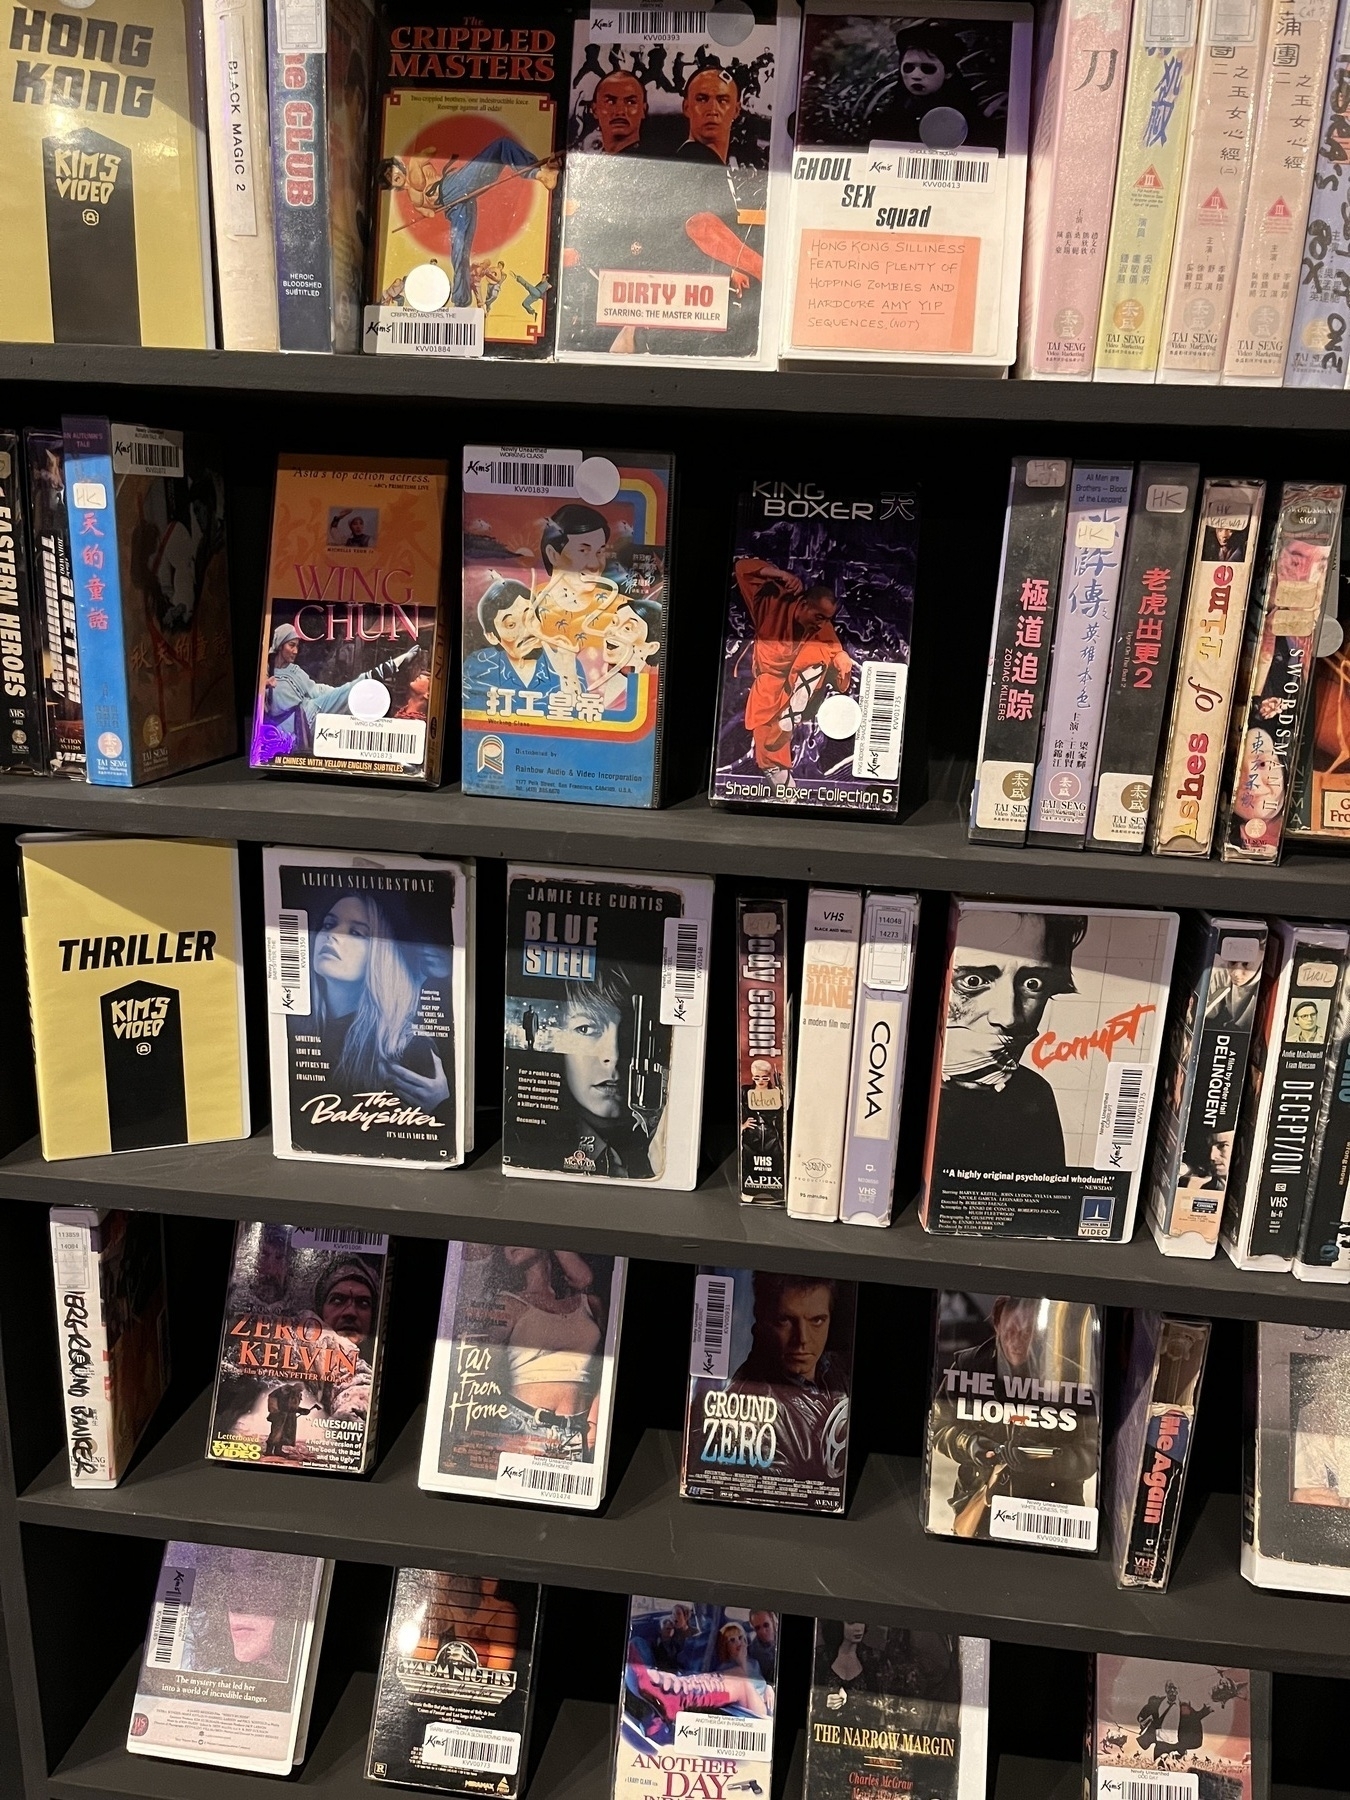 A shelf of VHS tapes, mostly obscure,B, or Japanese genre films. 